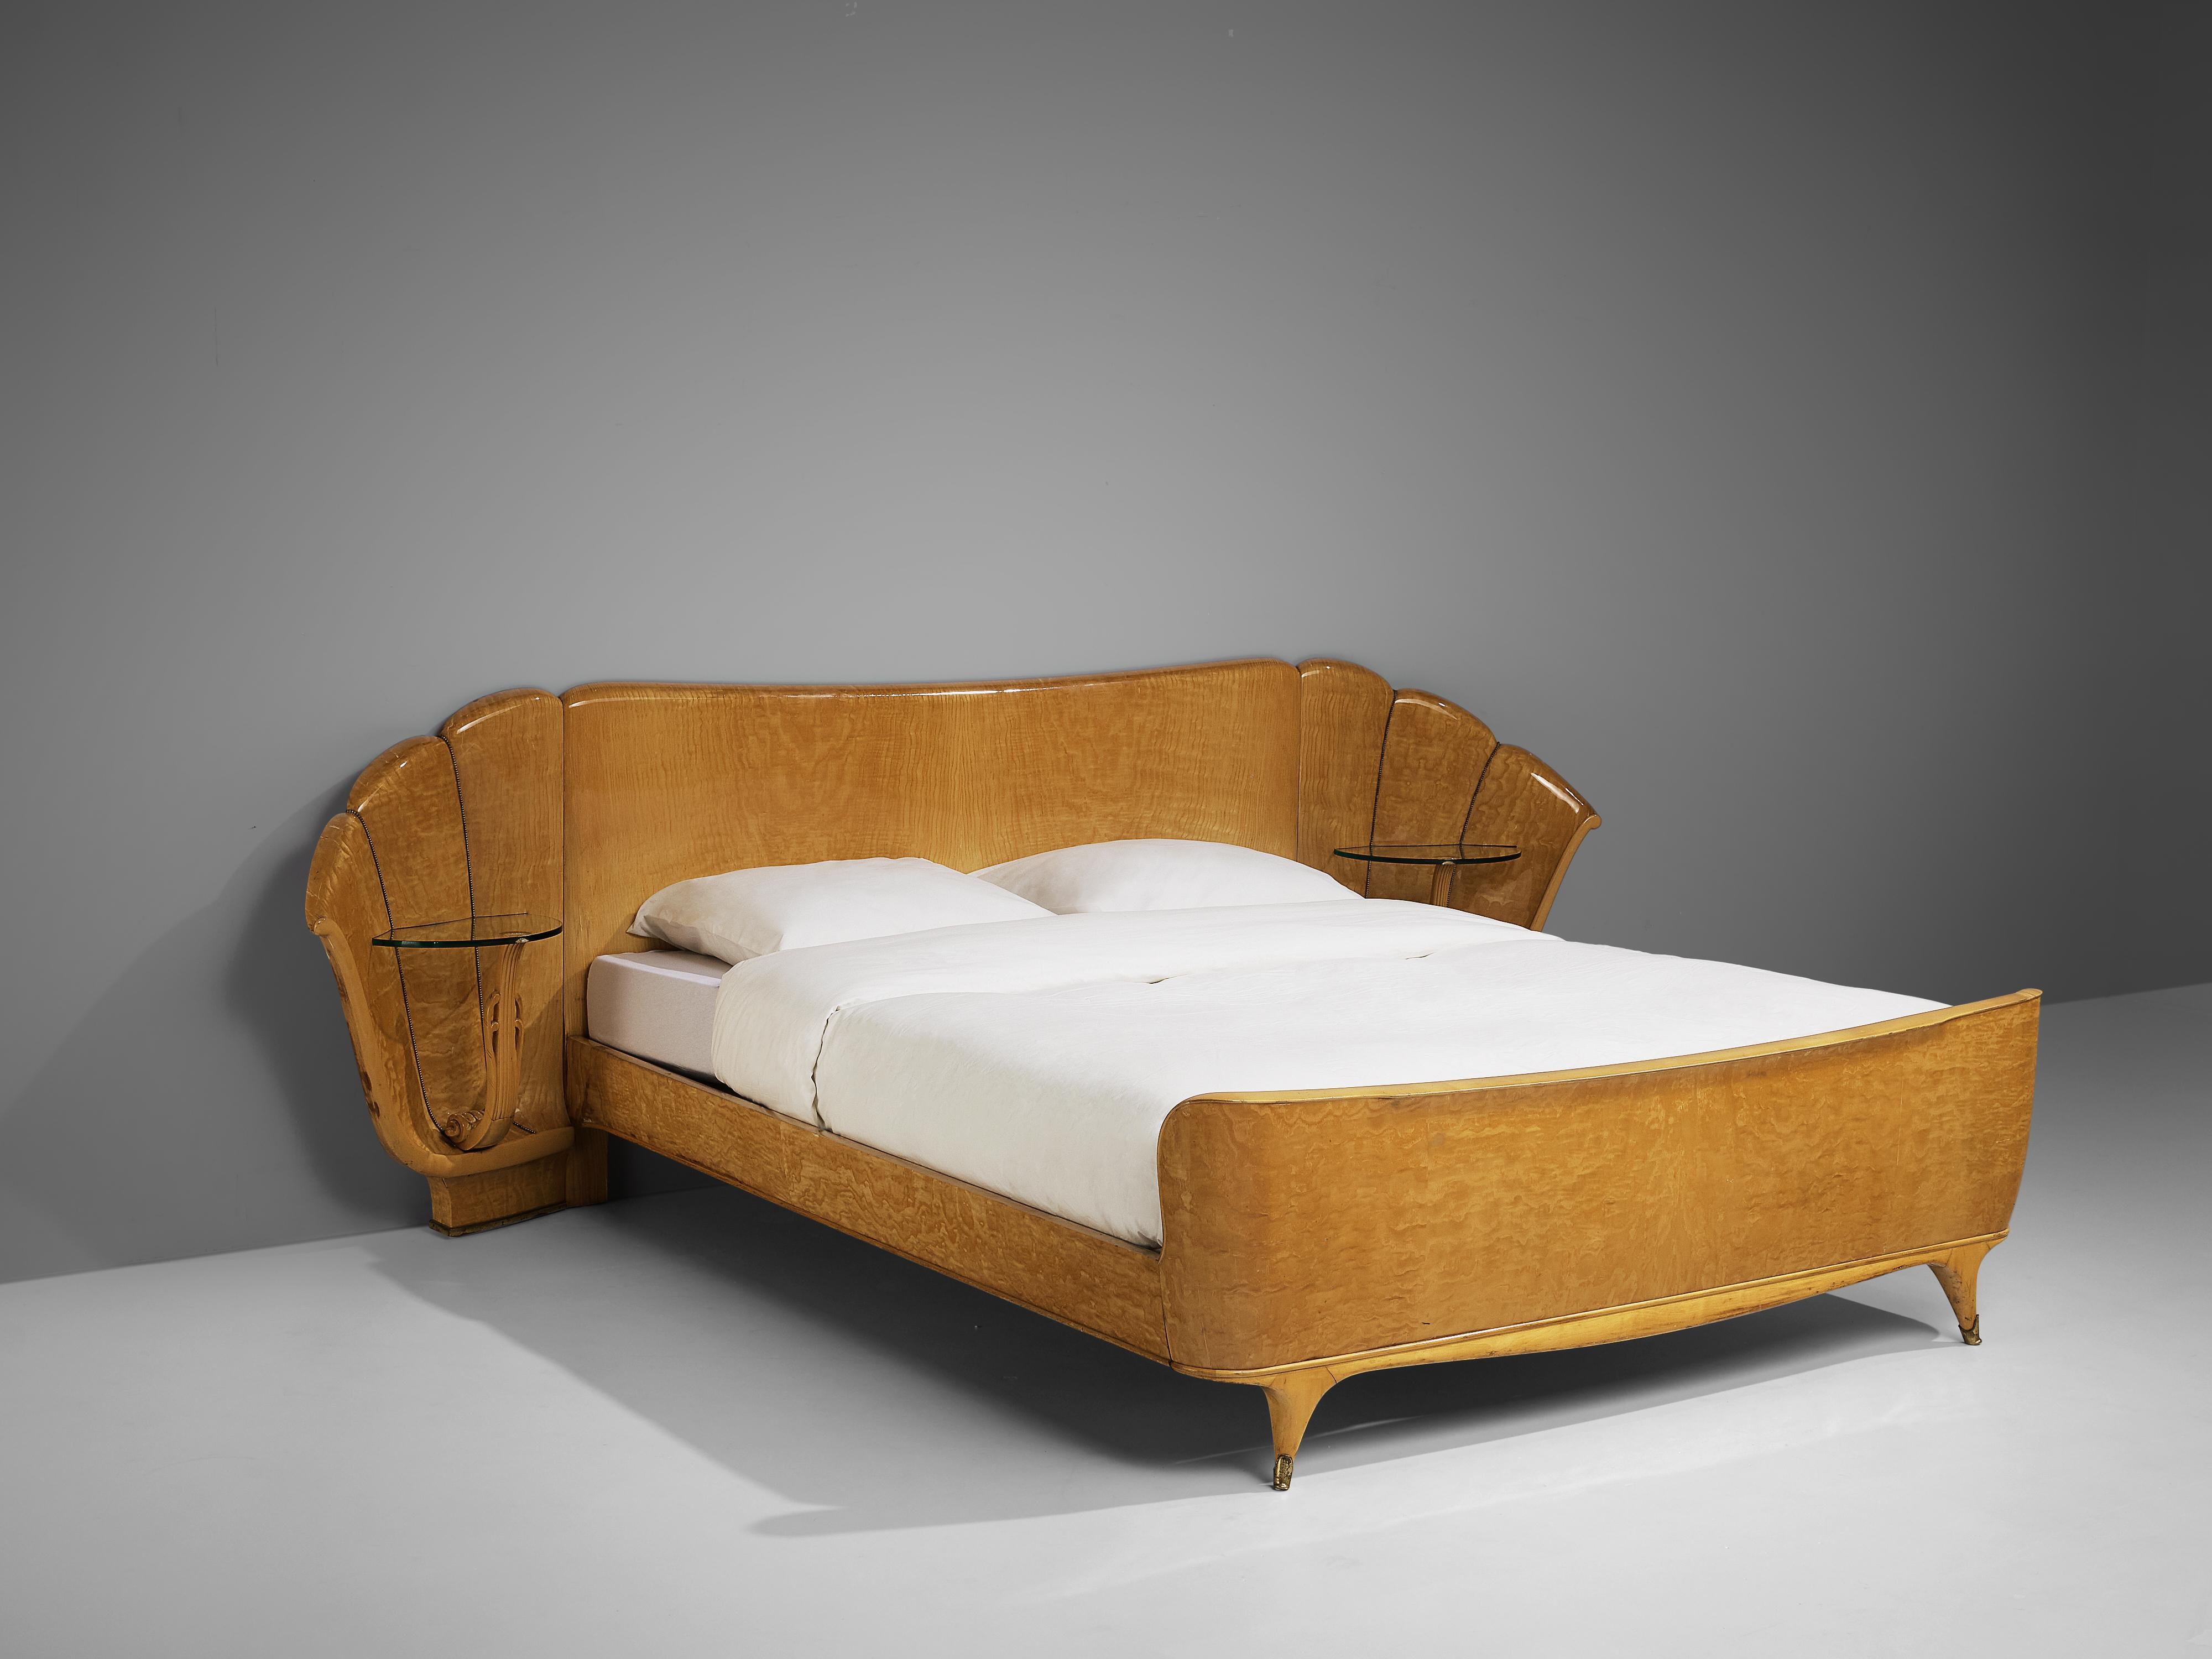 Italian double bed, ash, glass, brass, Italy, 1950s

Double bed with two integrated side tables. The shape of the headboard features a dynamic design with slightly curved sides and shell-like design. Vertical lines with little brass nails structure